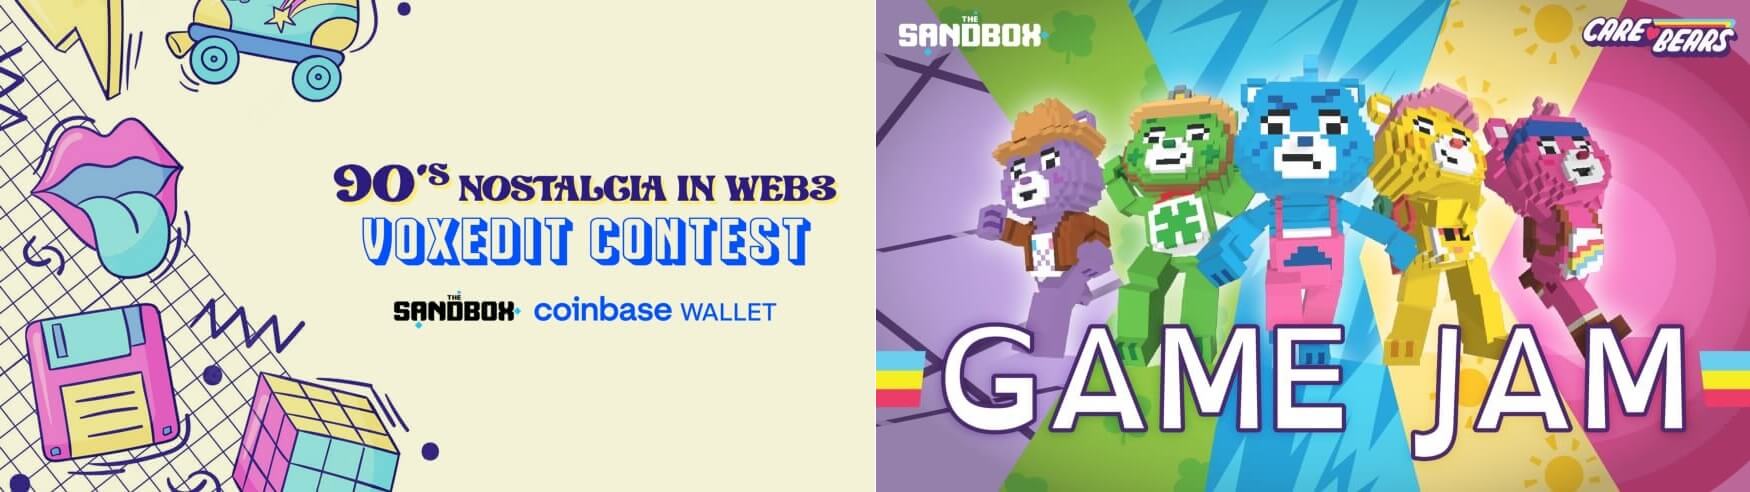 The Sandbox – 90’s Nostalgia Voxedit Contest and Care Bears Game Jam